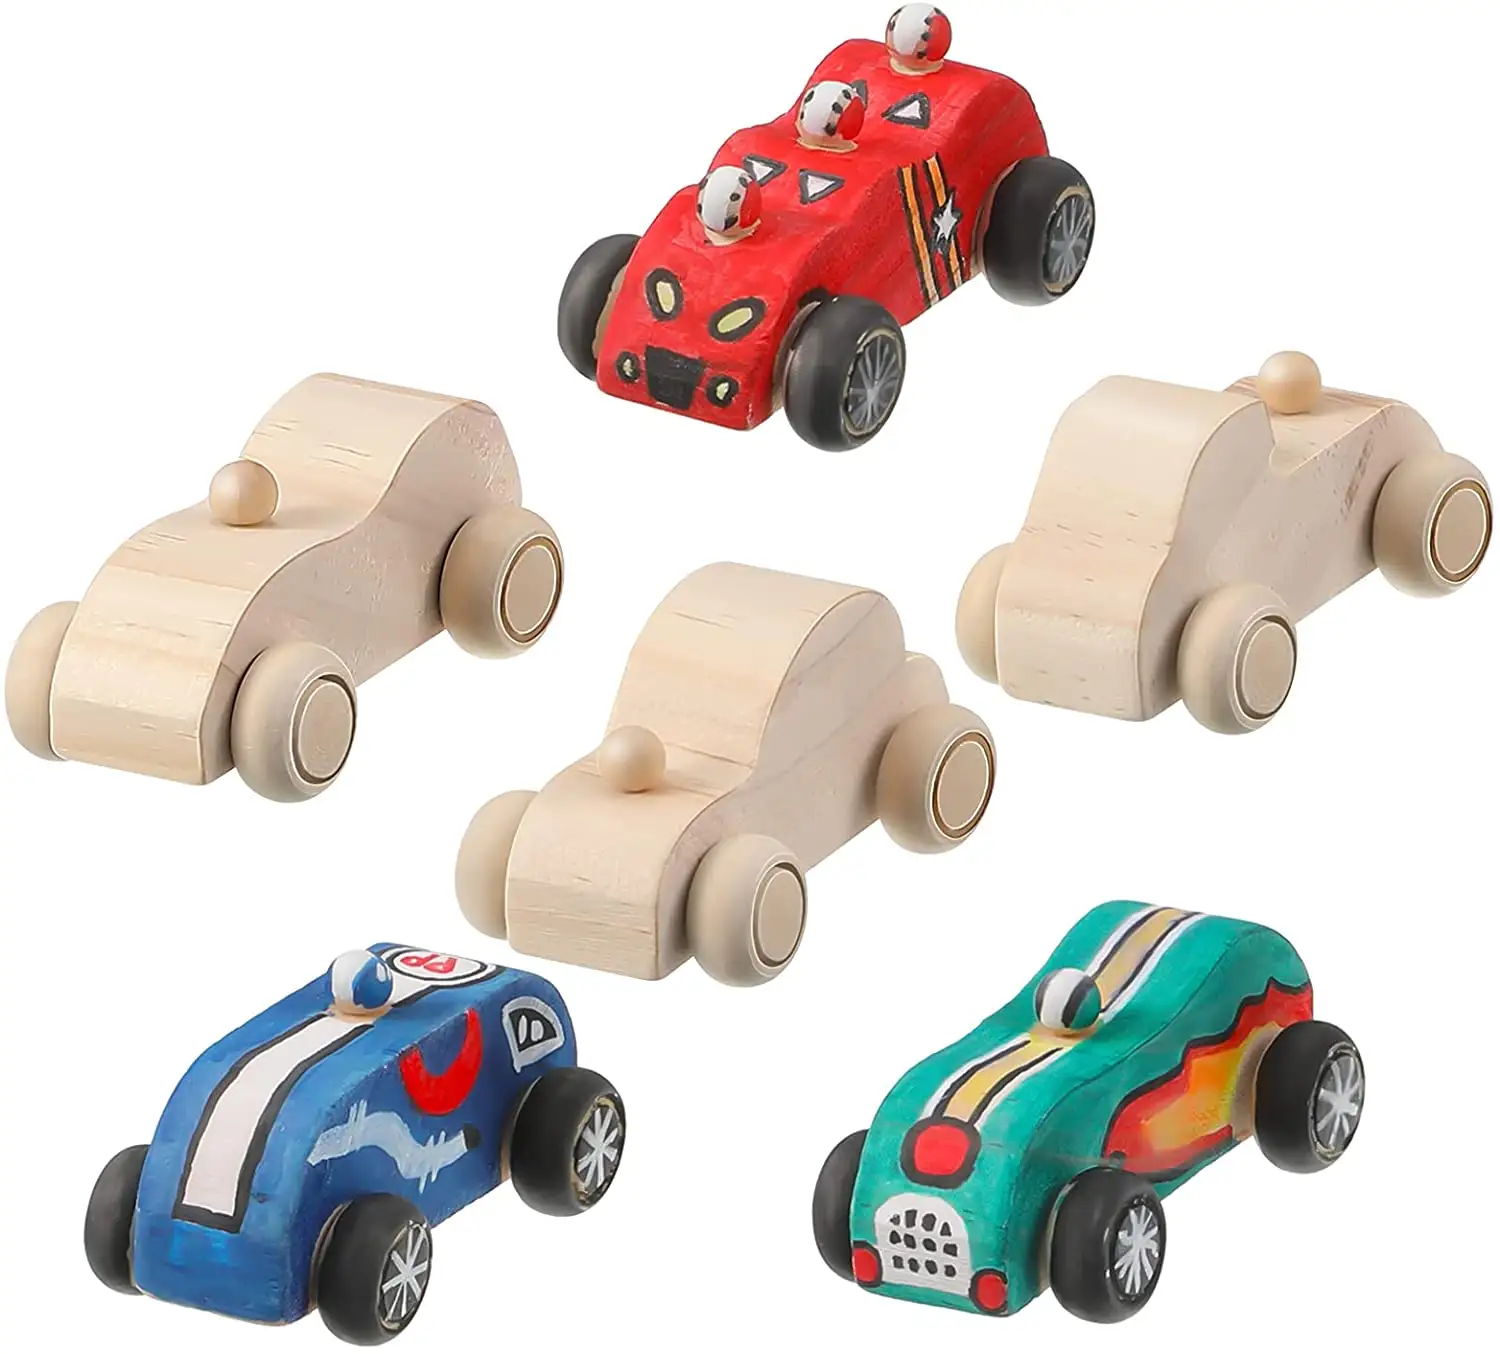 6 Pieces Unfinished Wood Cars Wooden Race Car Wood DIY Car Toys Crafts for Students Home Activities Craft